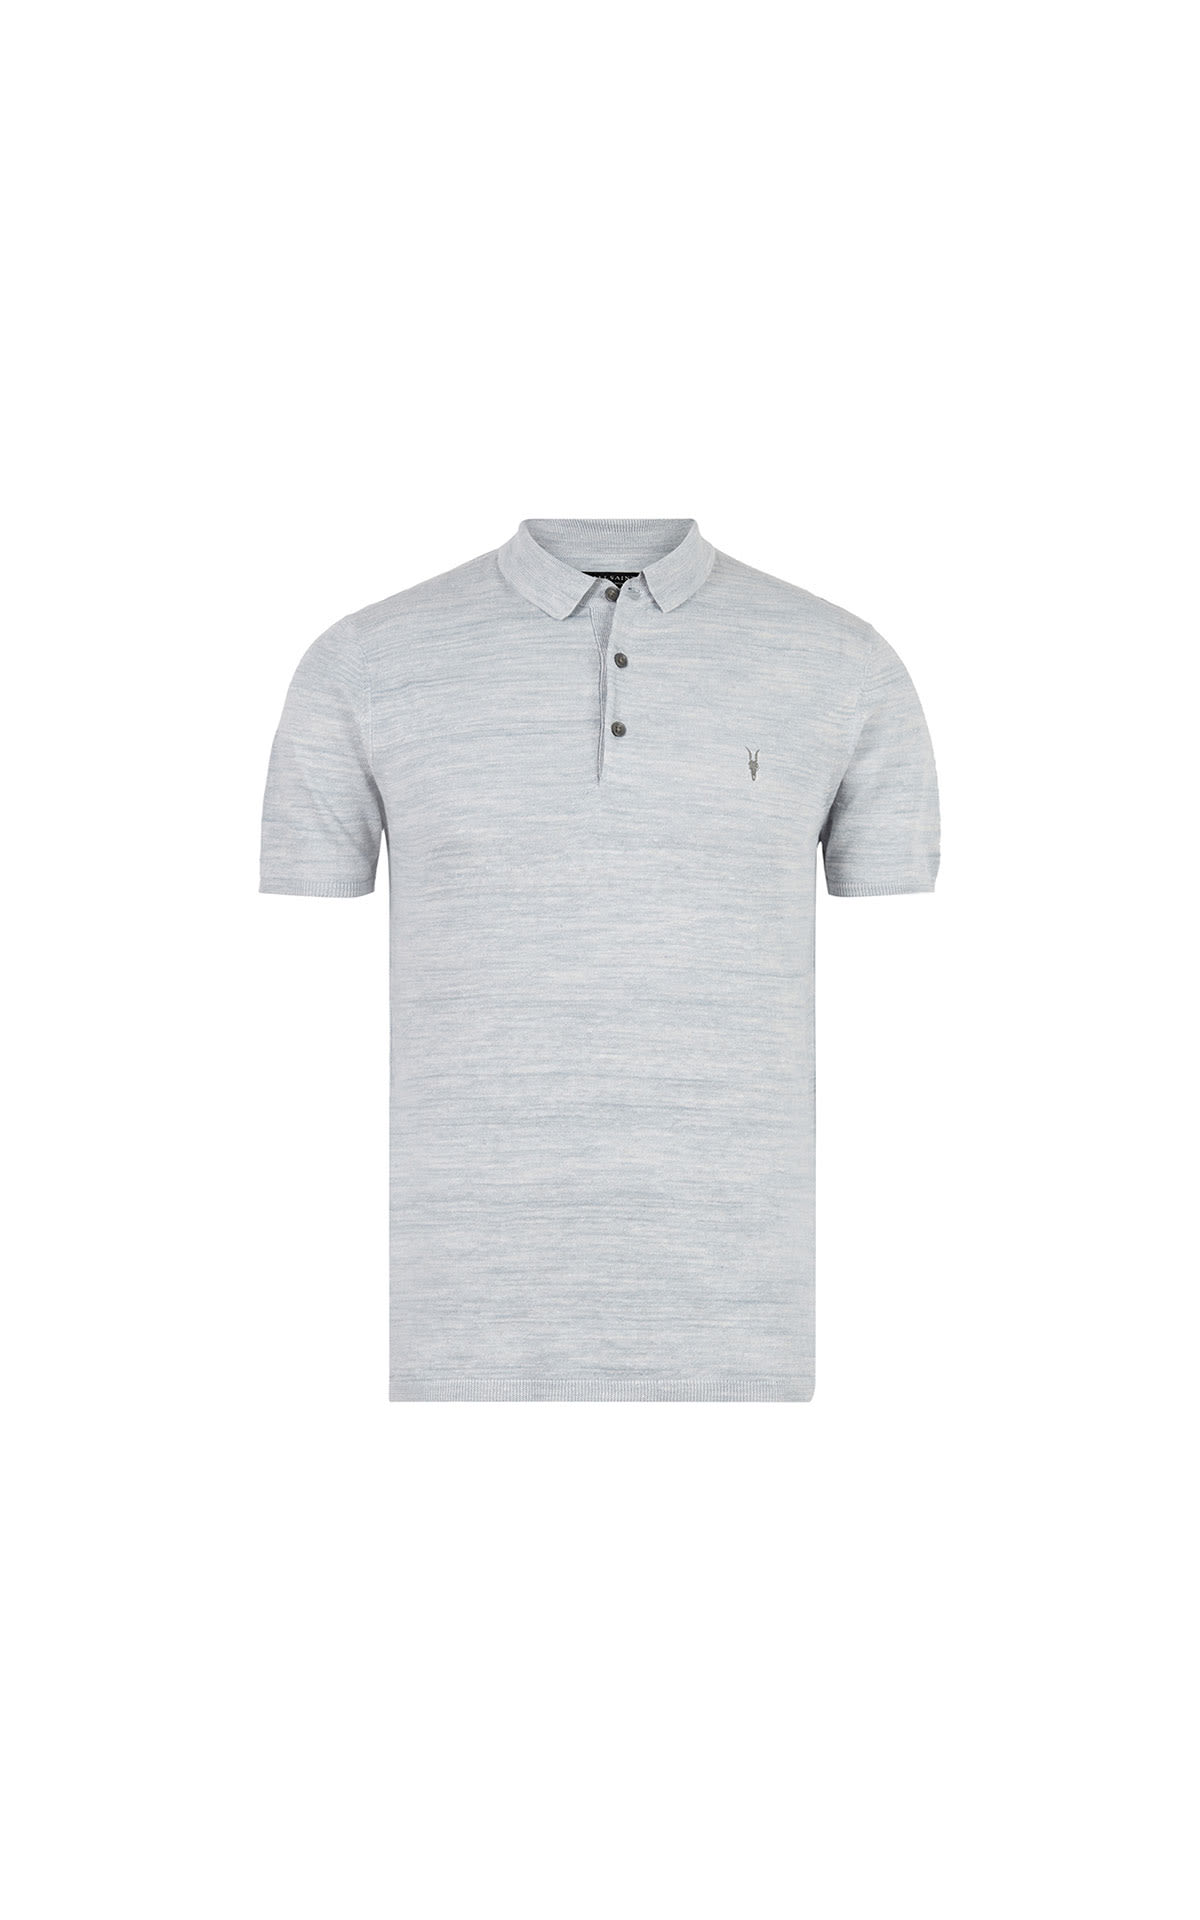 AllSaints Joshua ss polo breezy blue marl from Bicester Village